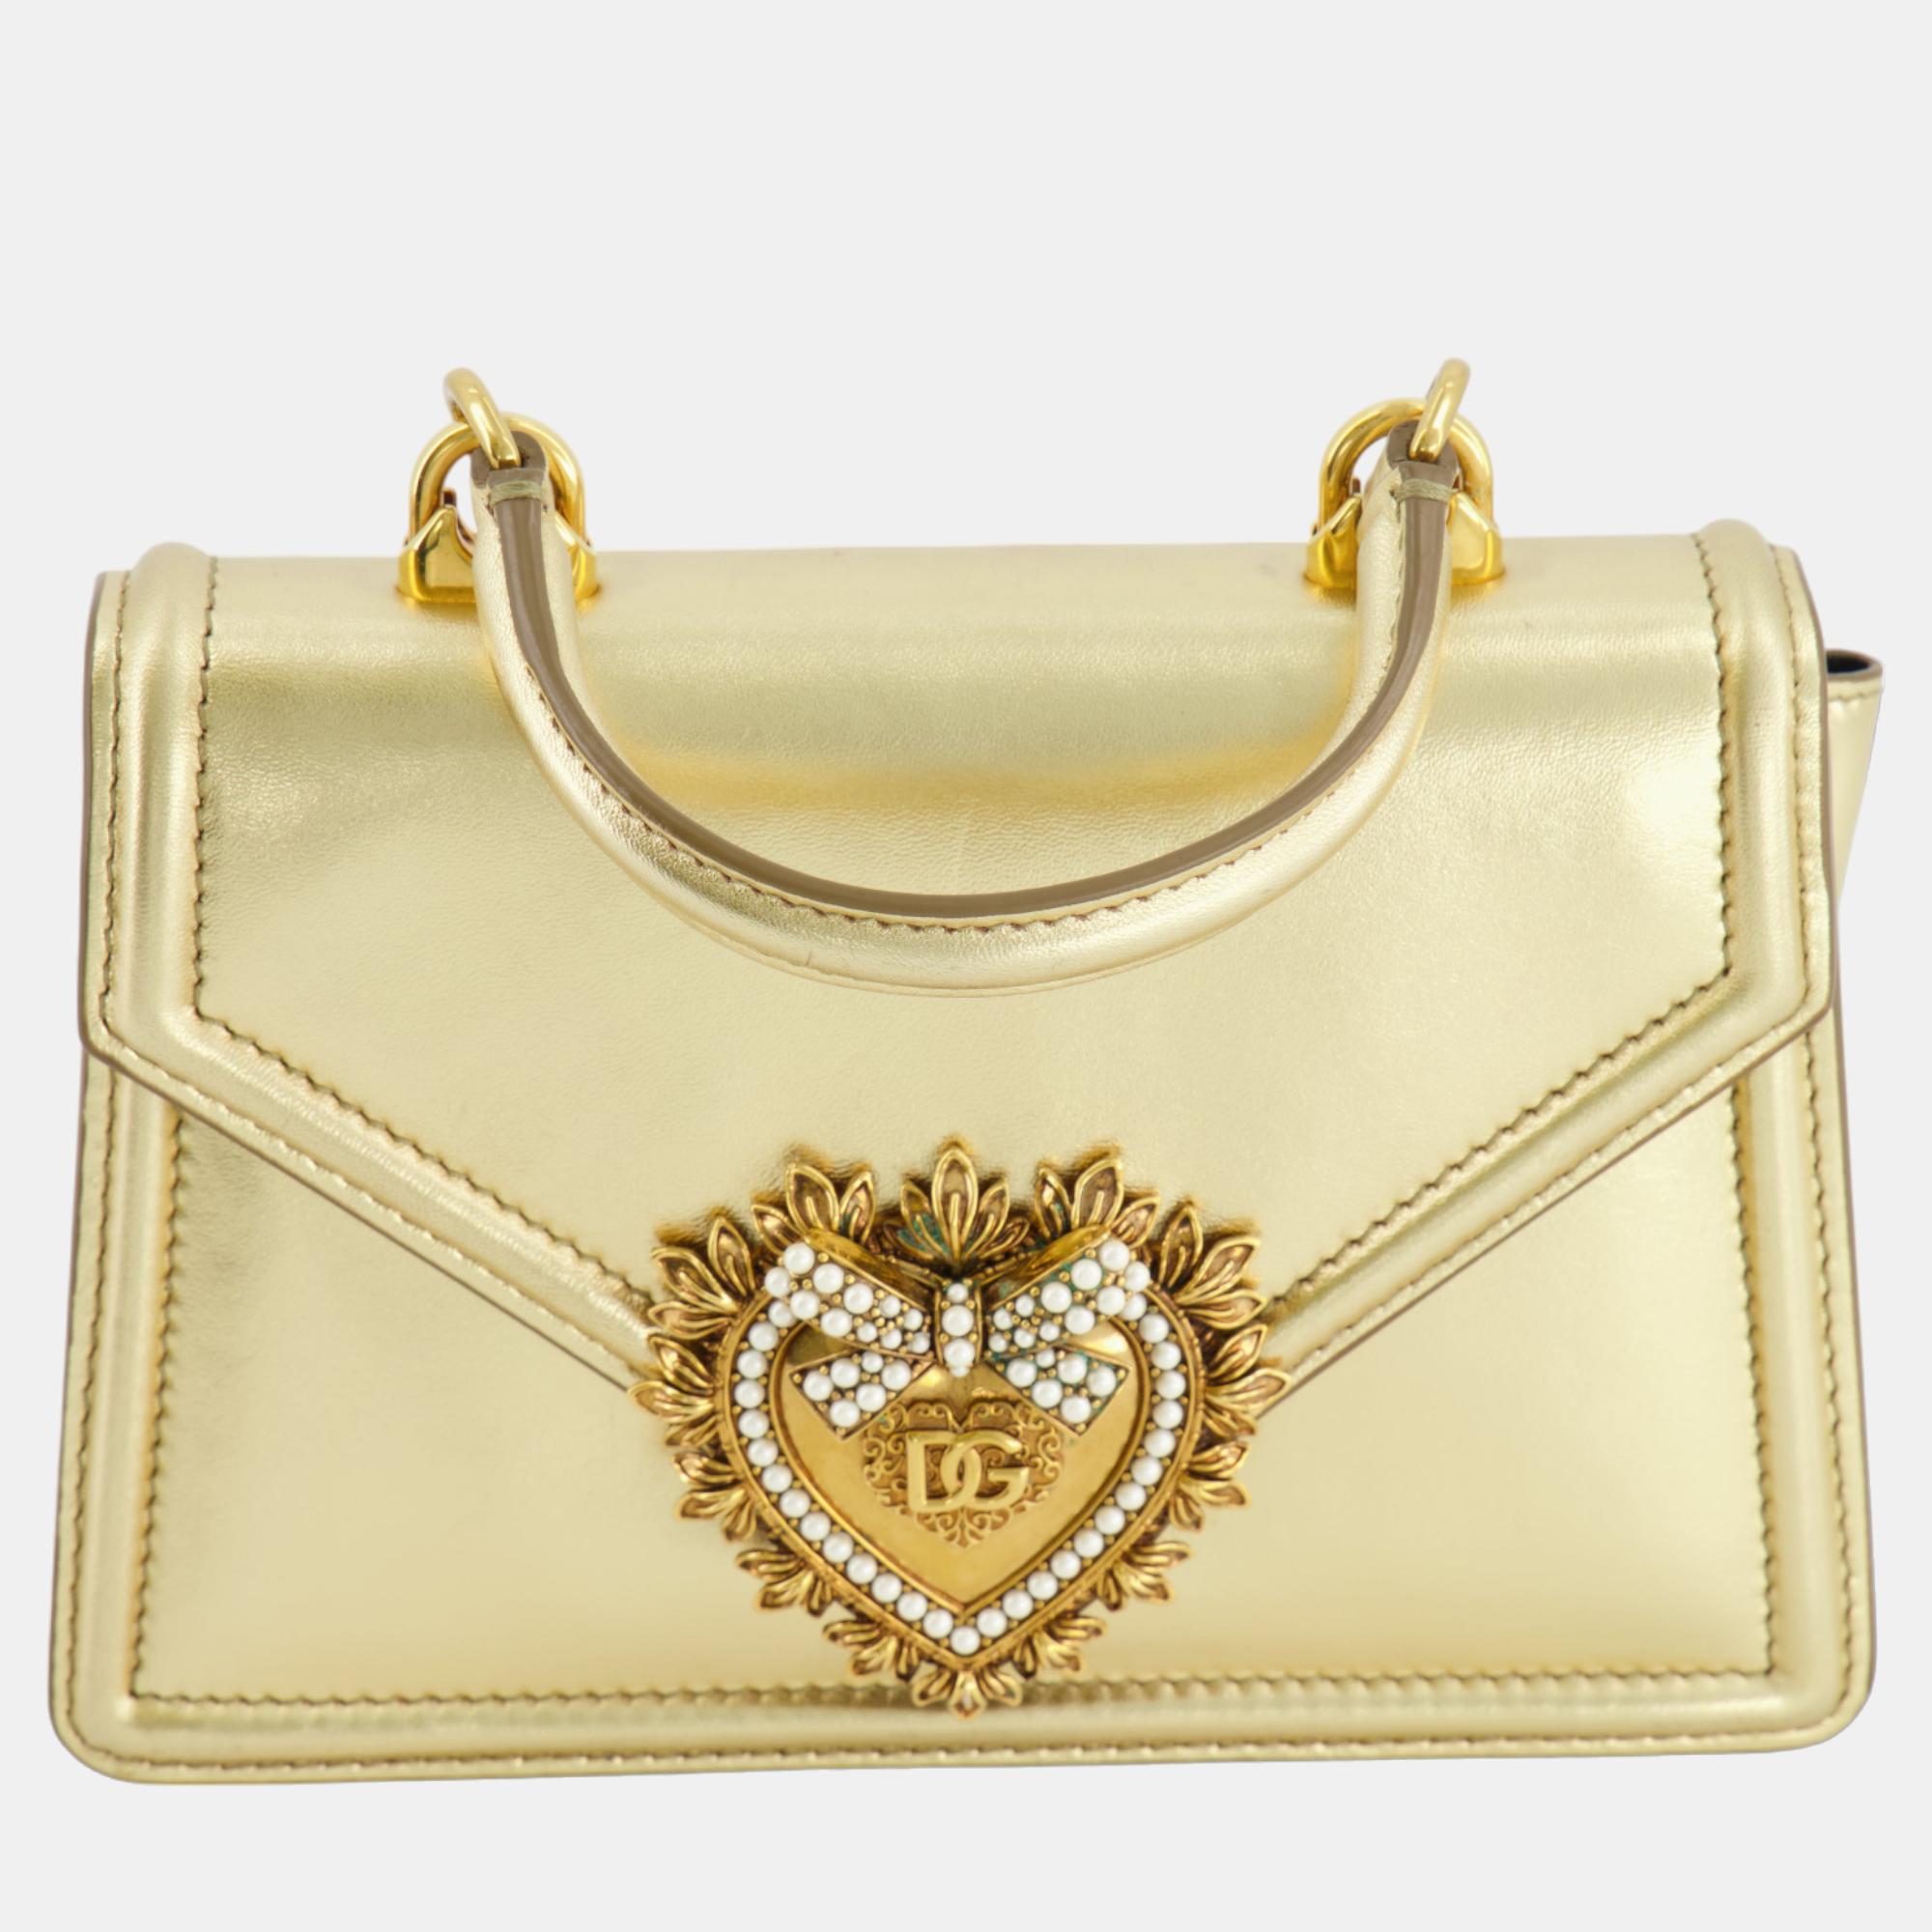 Dolce & Gabbana Gold Leather Small Devotion Top-Handle Bag With Gold Hardware